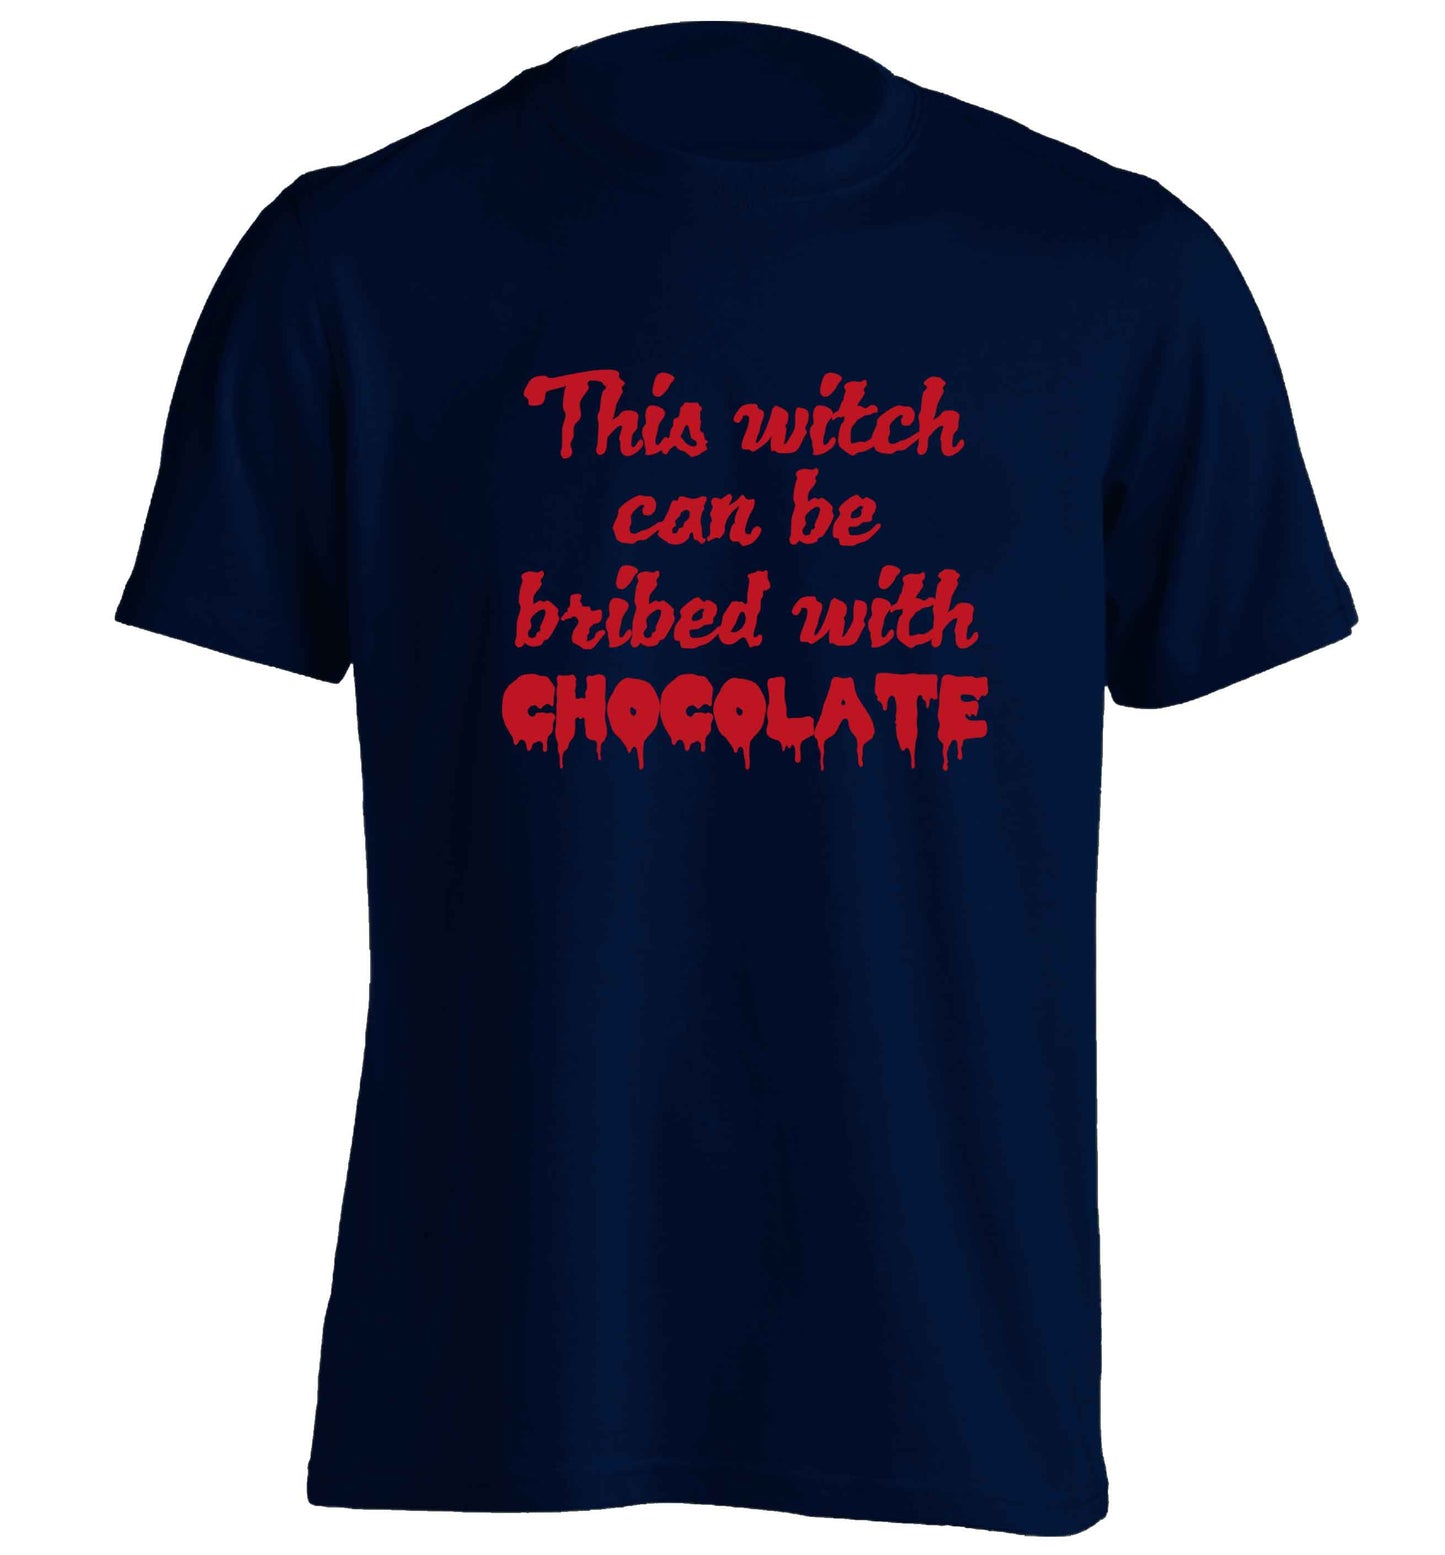 This witch can be bribed with chocolate adults unisex navy Tshirt 2XL